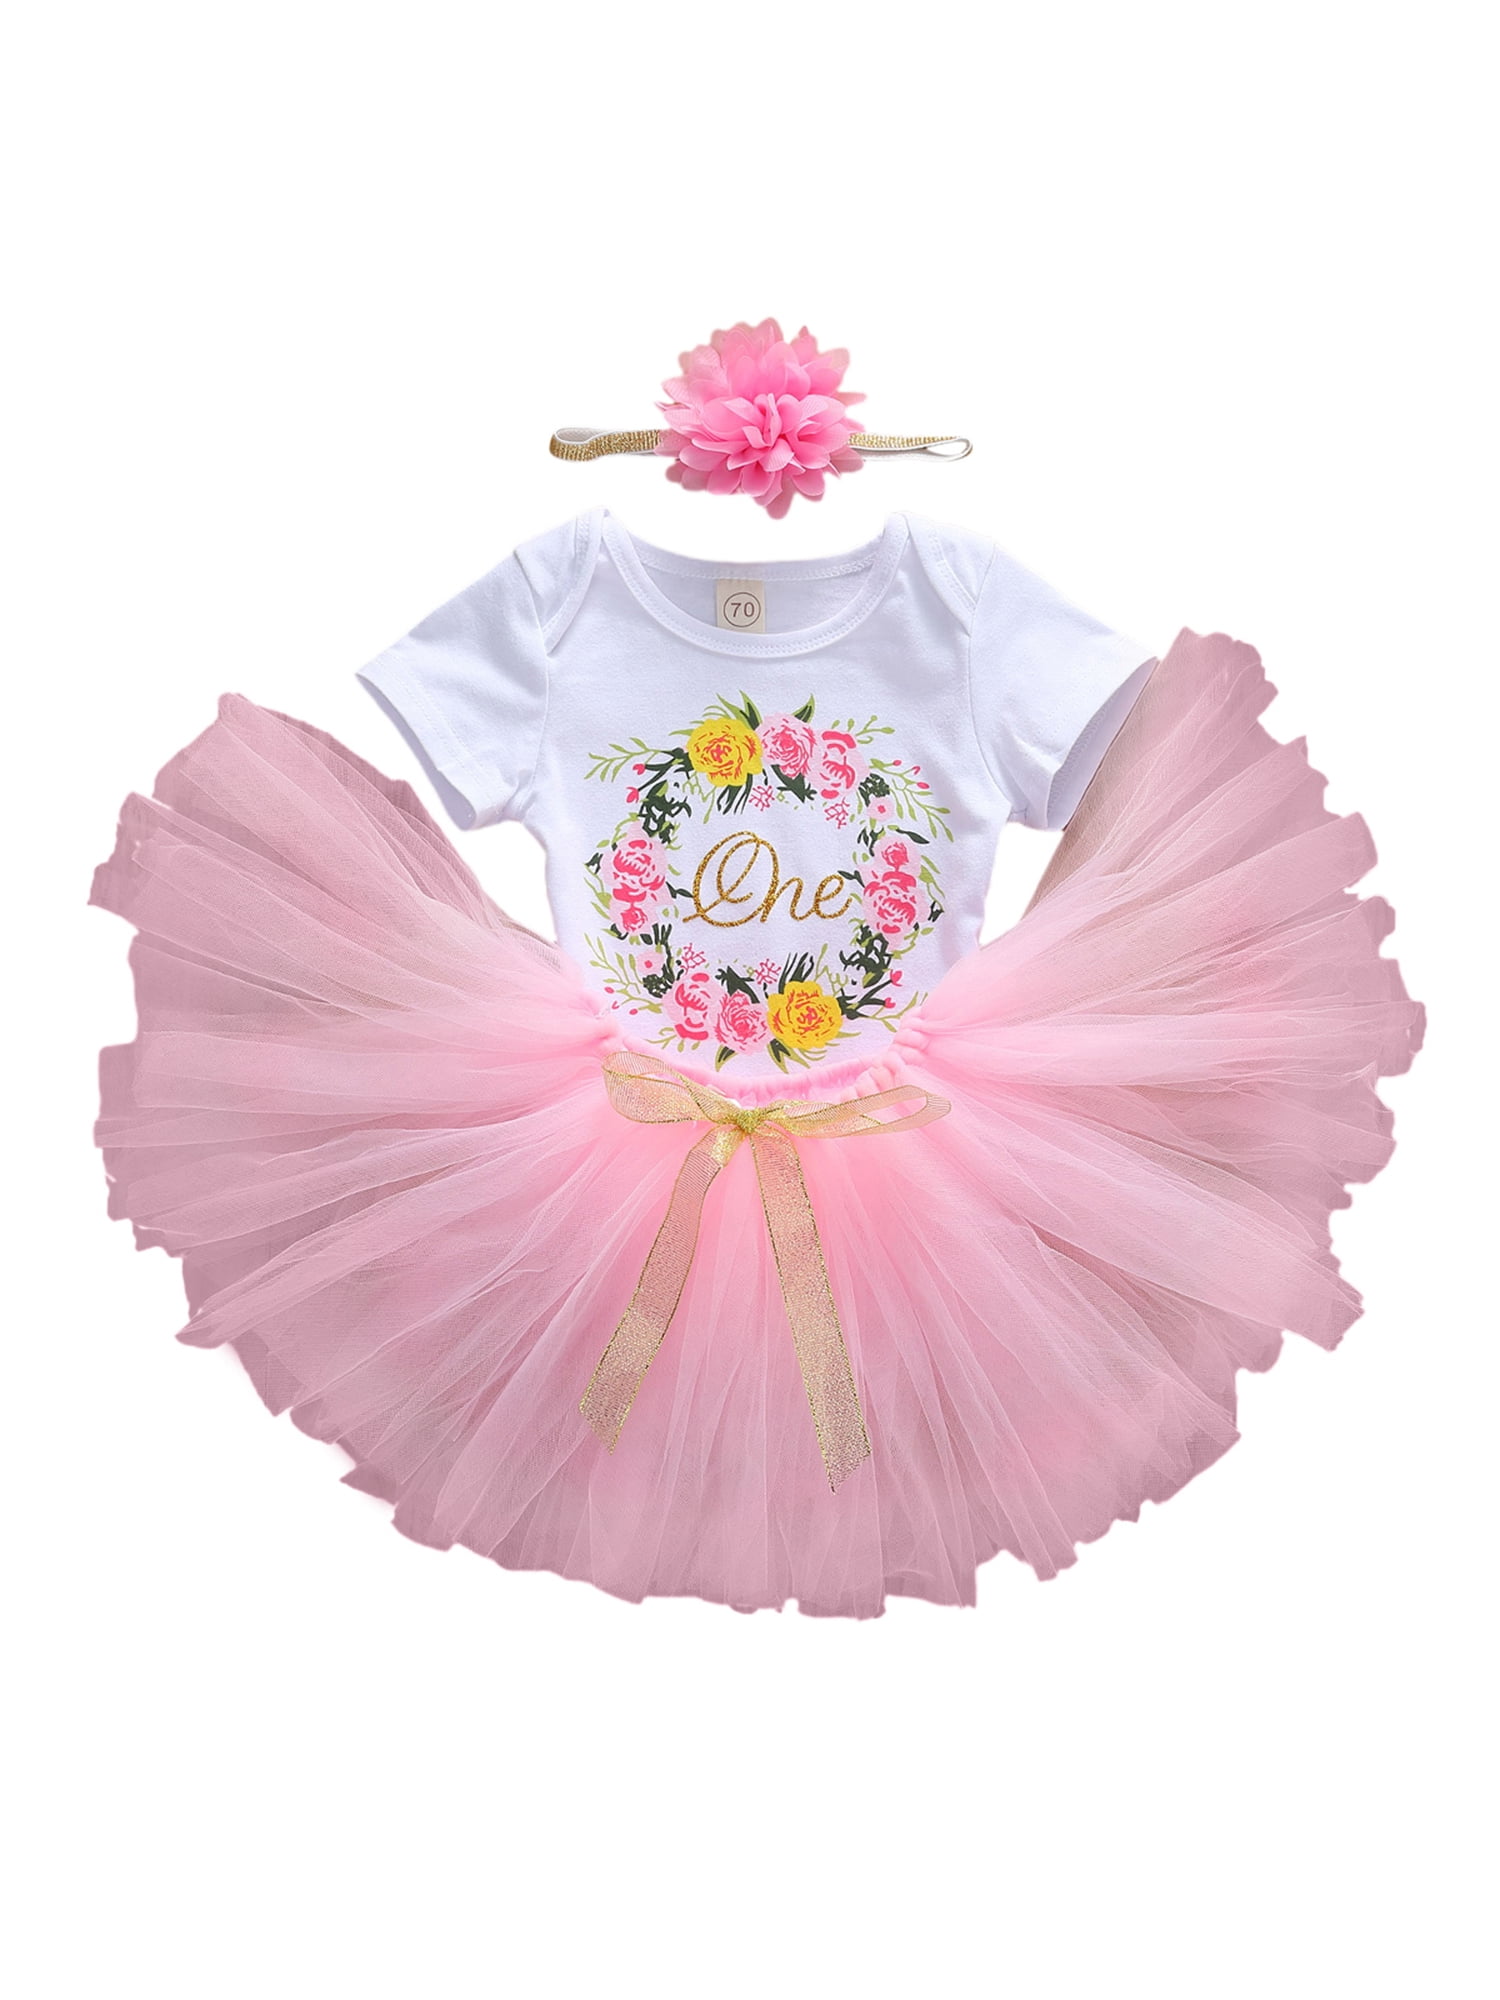 Infant Baby Girls First 1st Birthday Minnie Romper+Tutu Skirt Outfit Party Dress 